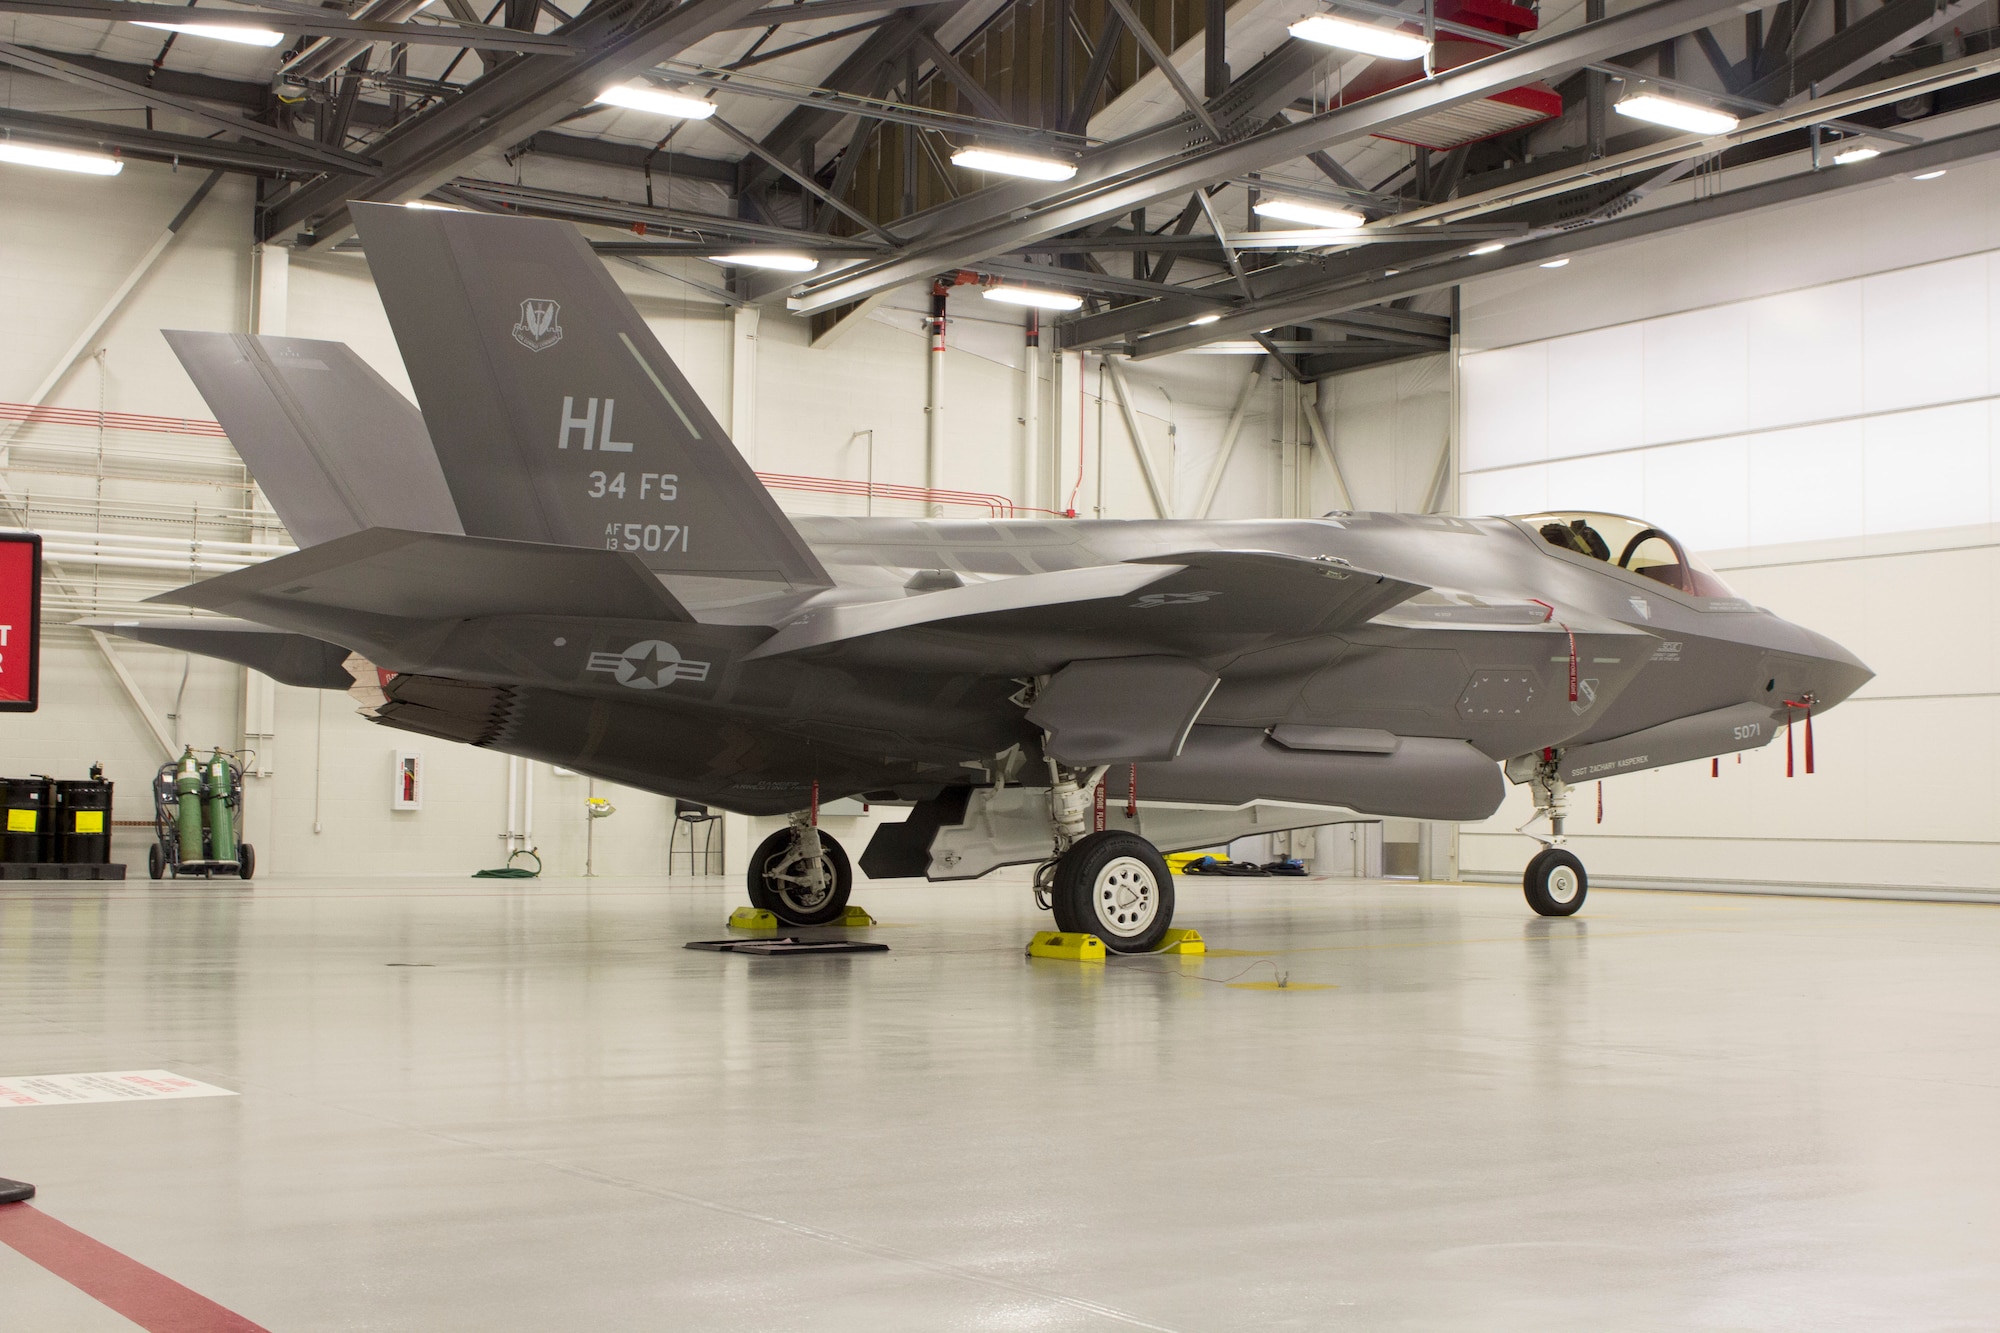 The F-35 Lightning II fighter jet at Hill Air Force Base, Utah. (U.S. Air Force photo/Susan Lawson/released)